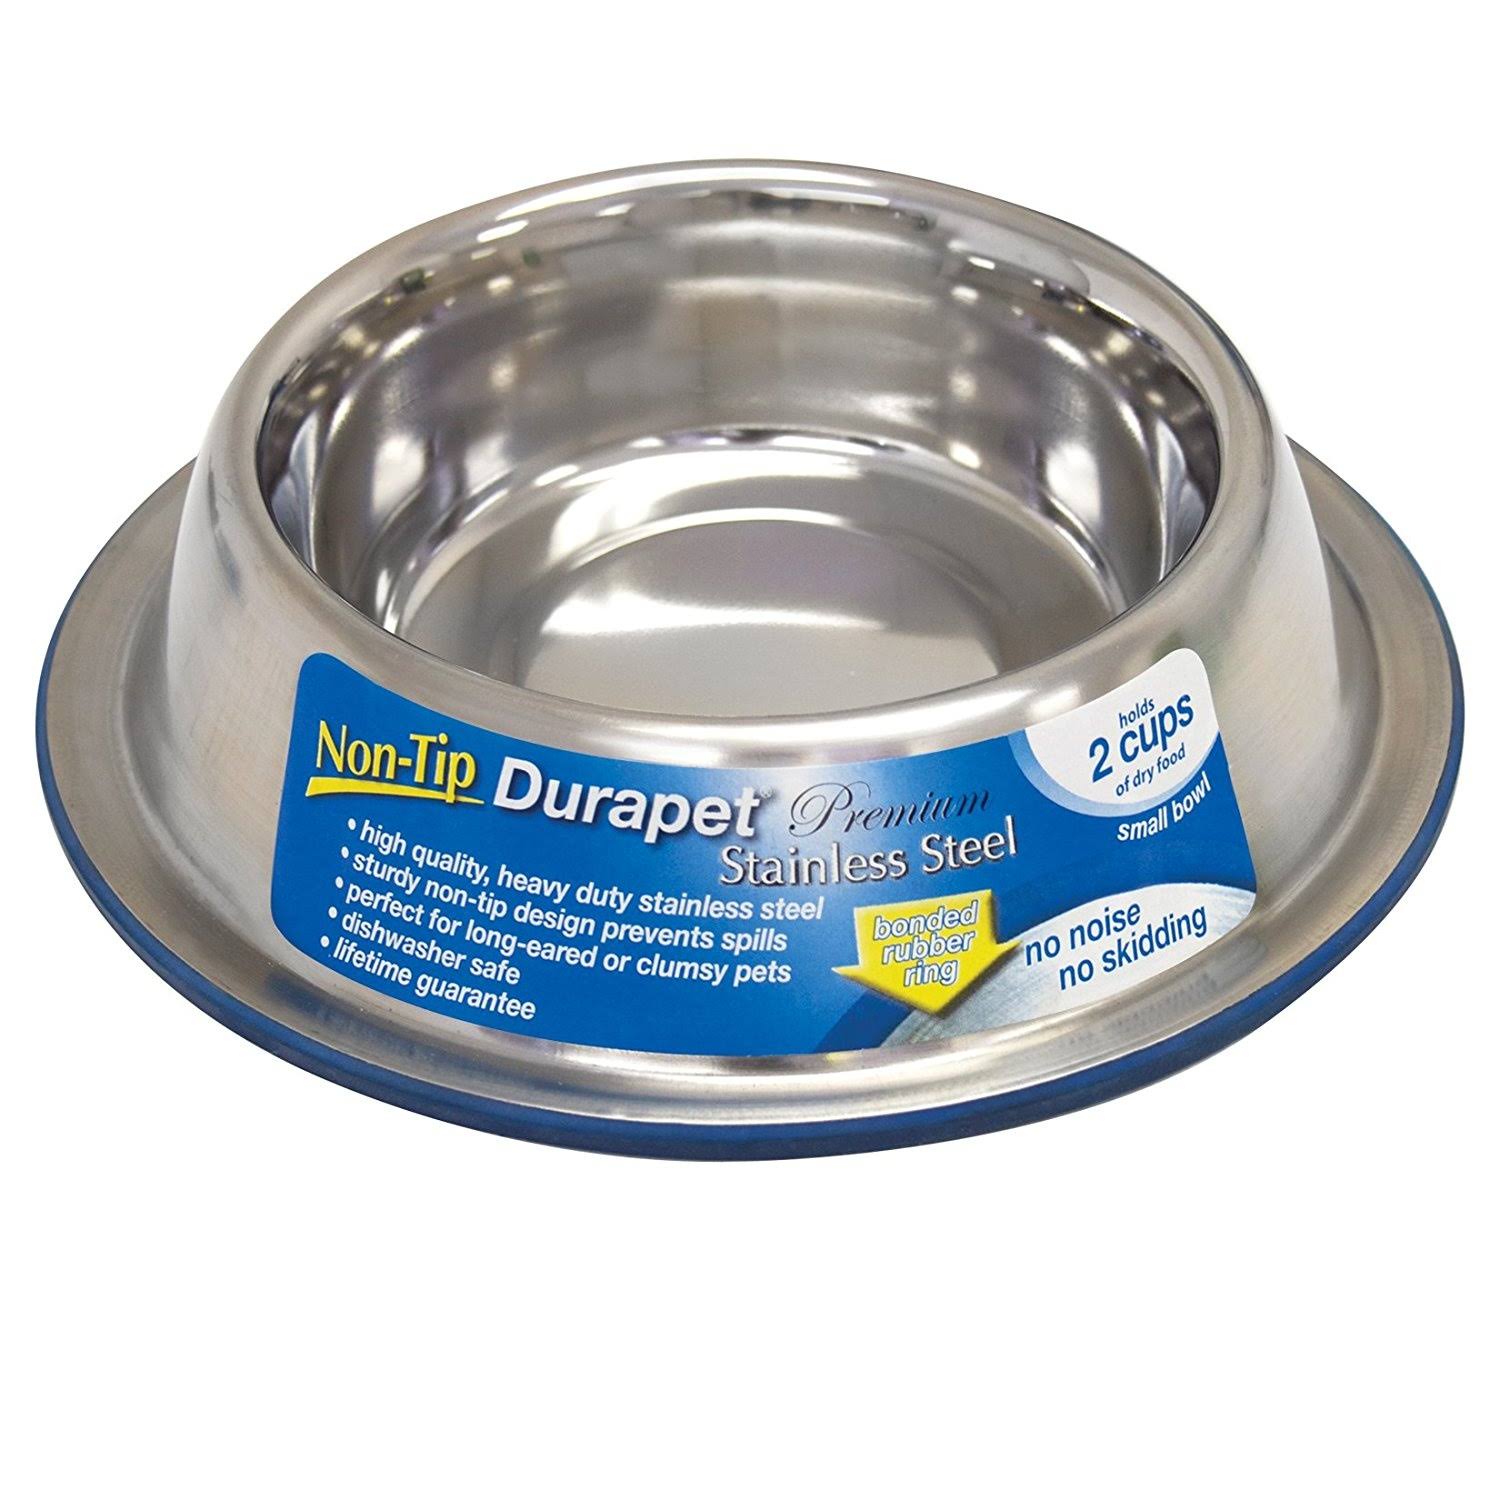 Our Pets Company Durapet Bowl - Small, Stainless Steel